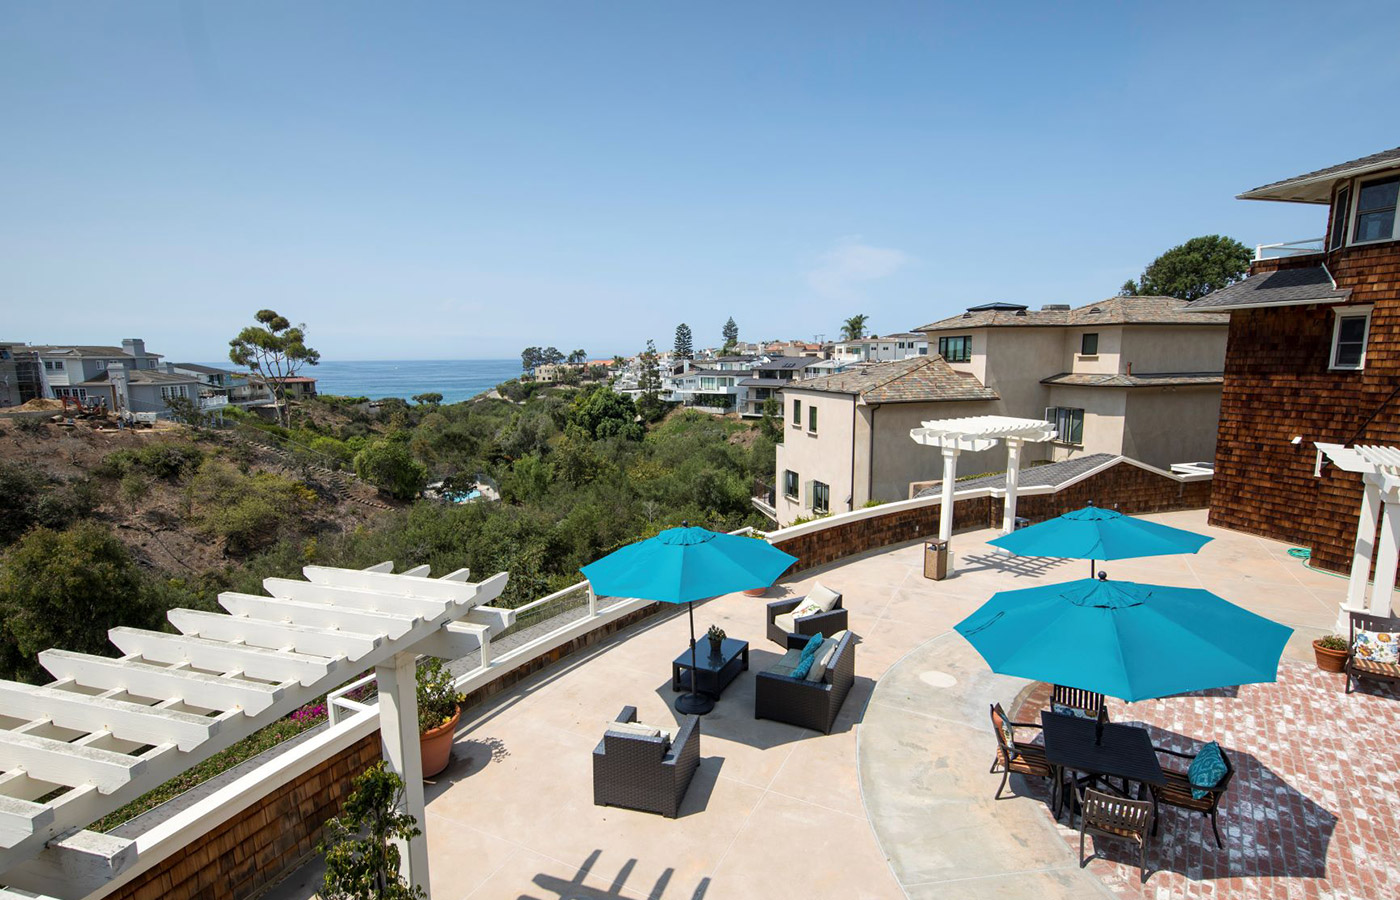 Patio area with ocean view at Crown Cove.